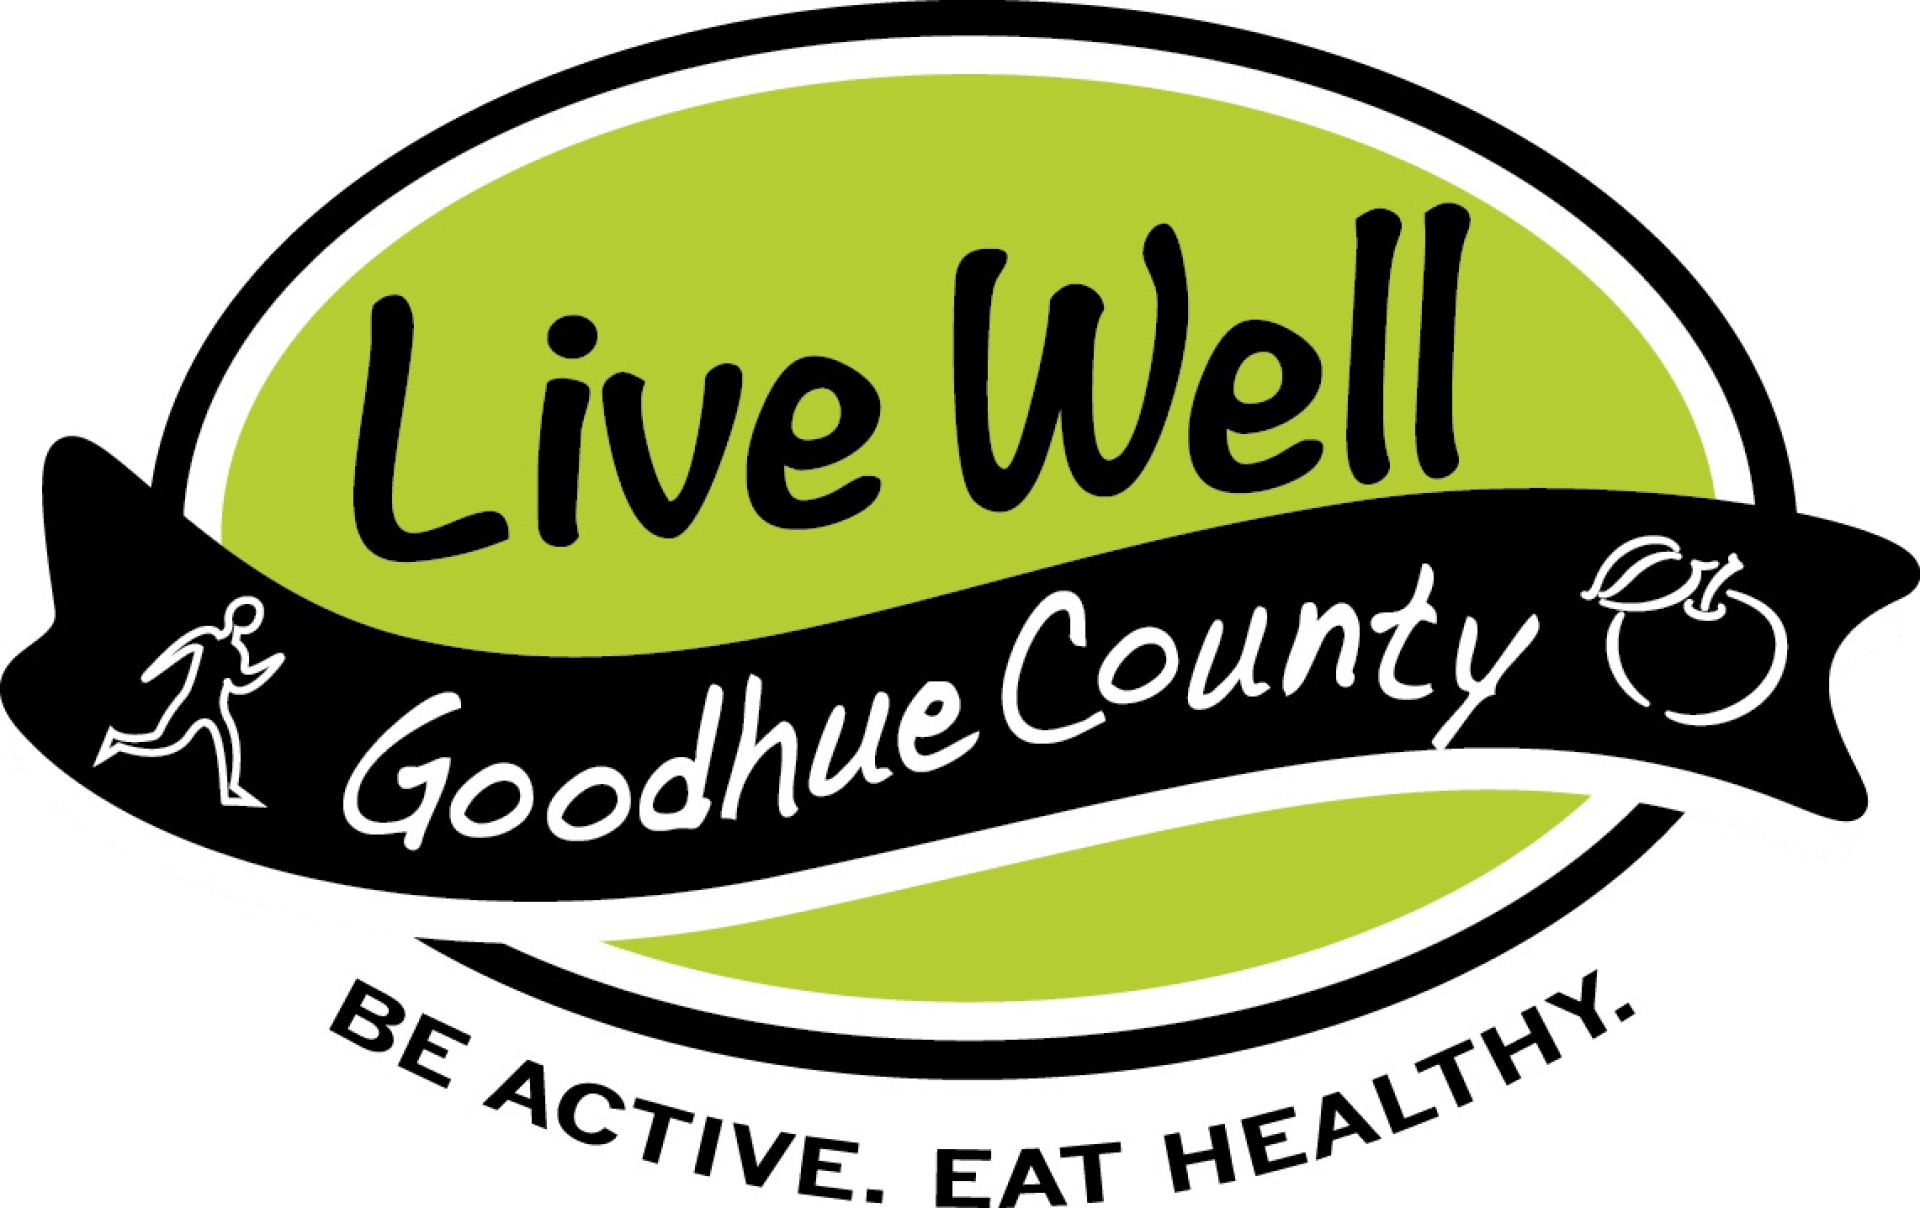 Live Well Goodhue County: Be Active. Eat Healthy.